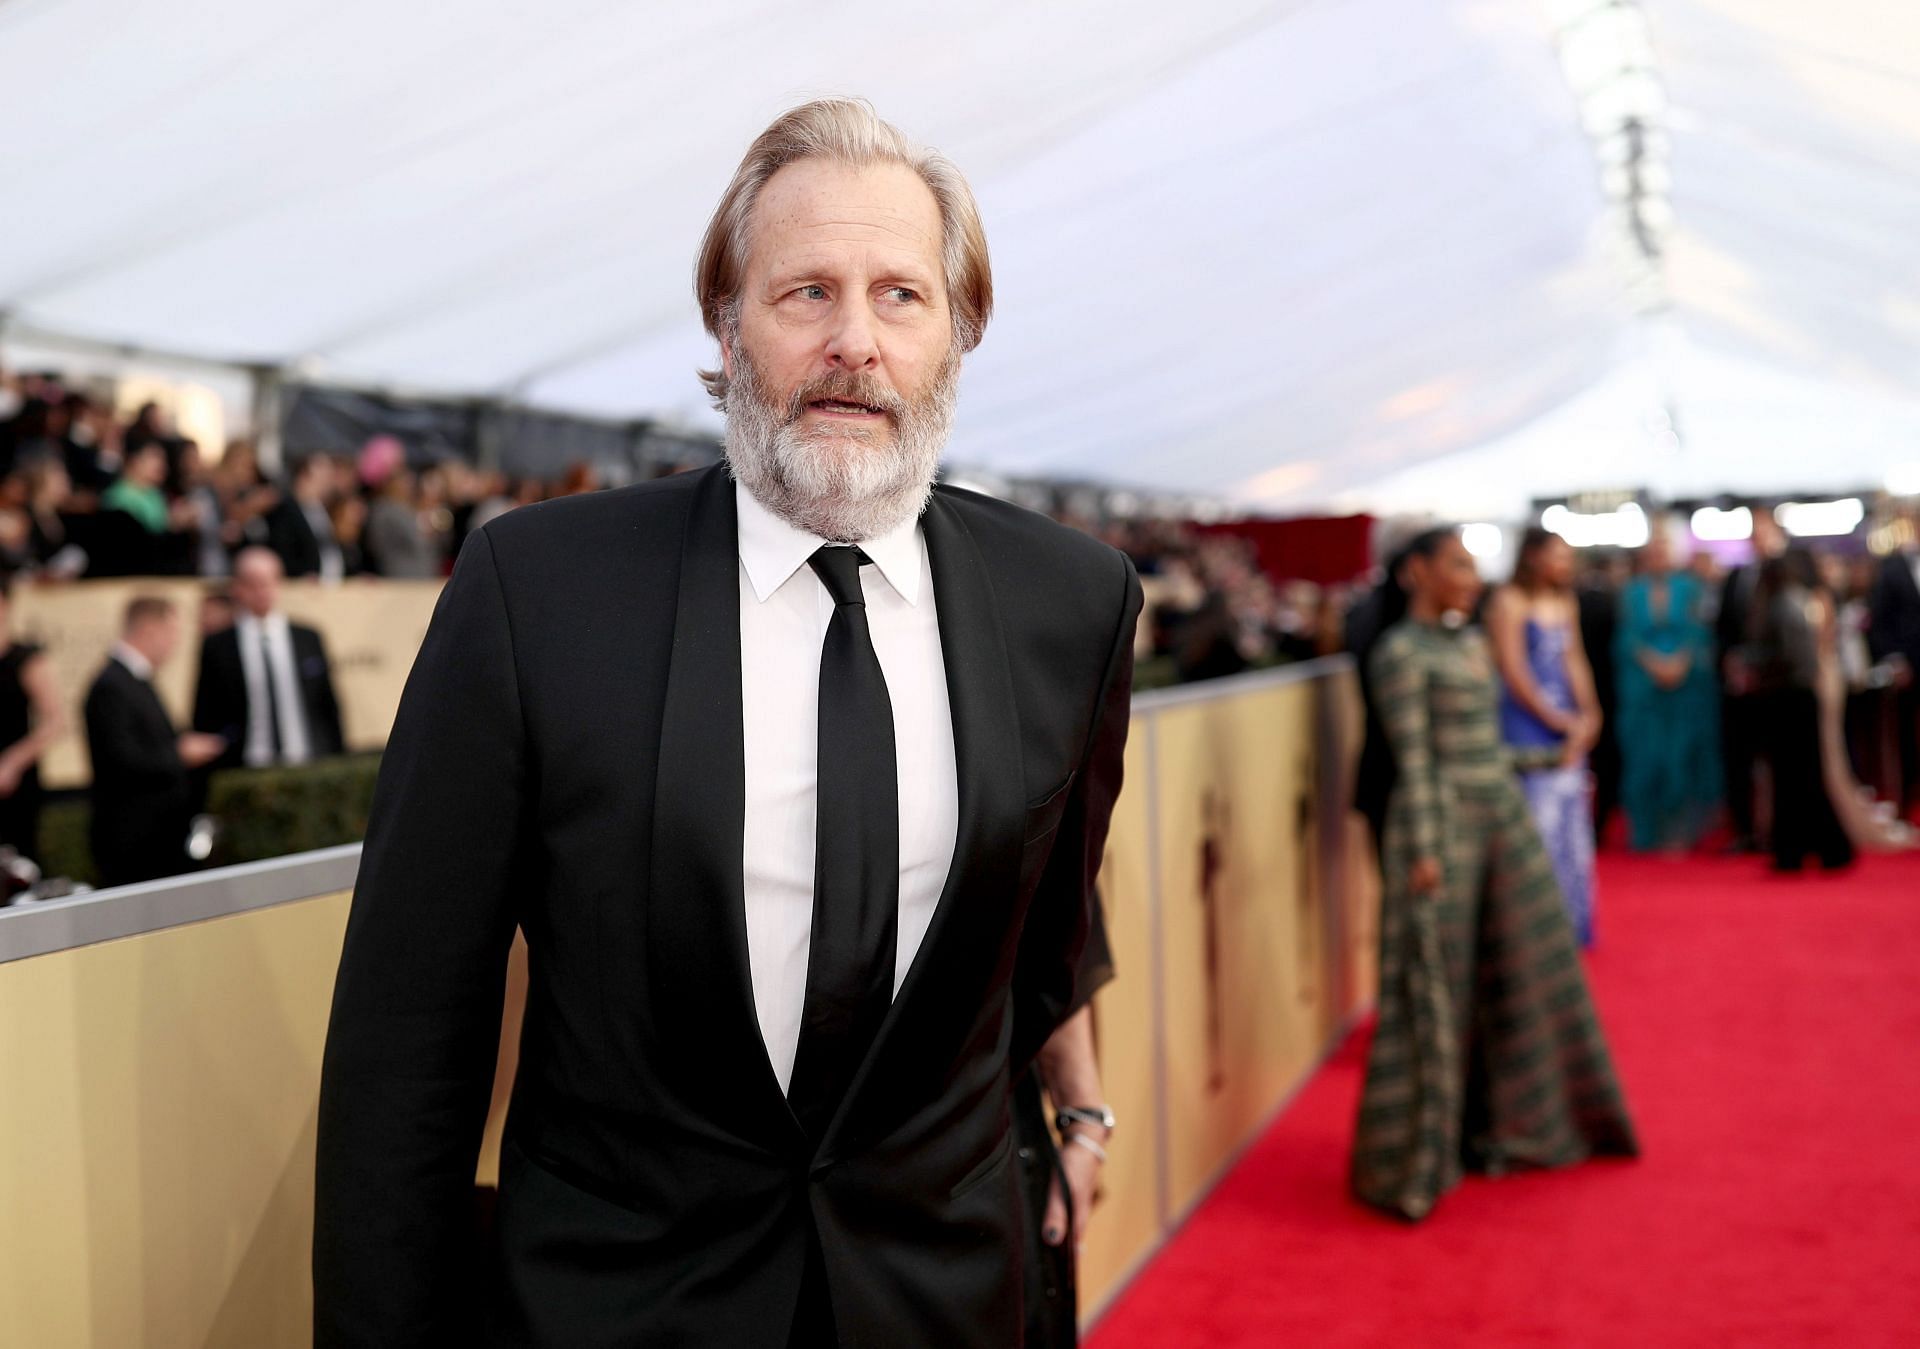 Jeff Daniels at the 24th Annual Screen Actors Guild Awards (image via Getty)